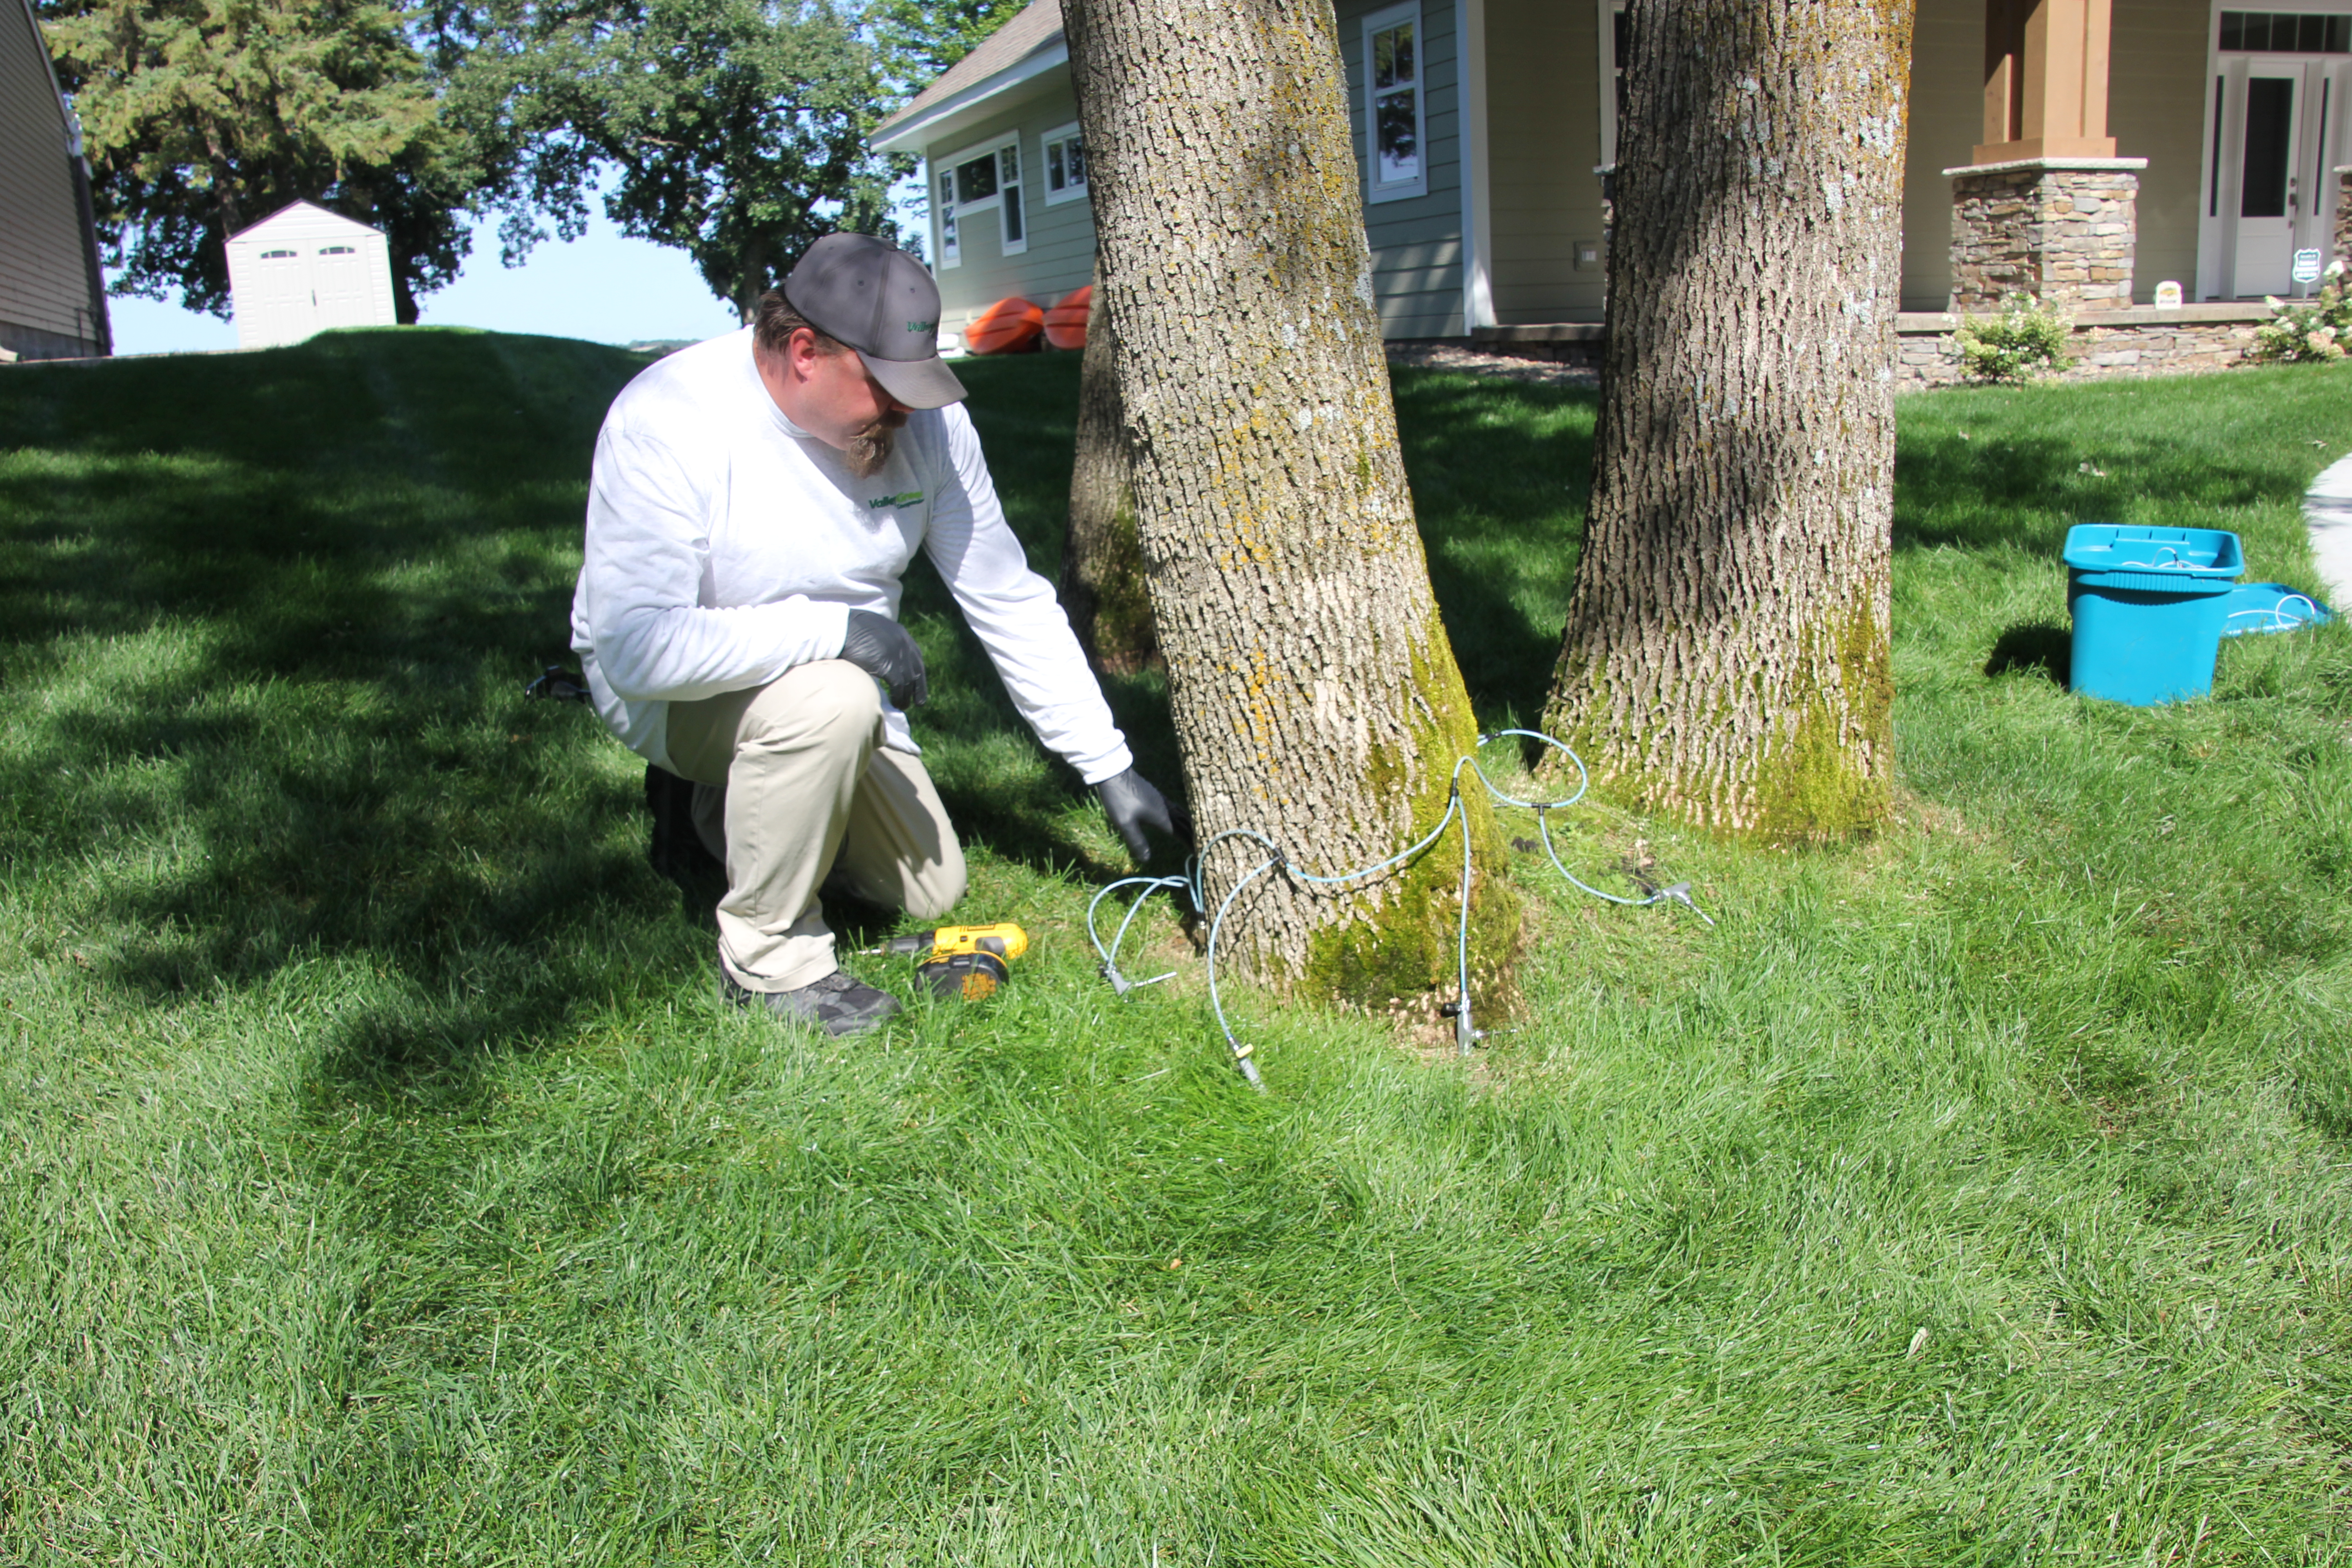 Valley Green employee Brad performing a micro-infusion method of Emerald Ash Borer treatment on an ash tree in Sartell, Minnesota.